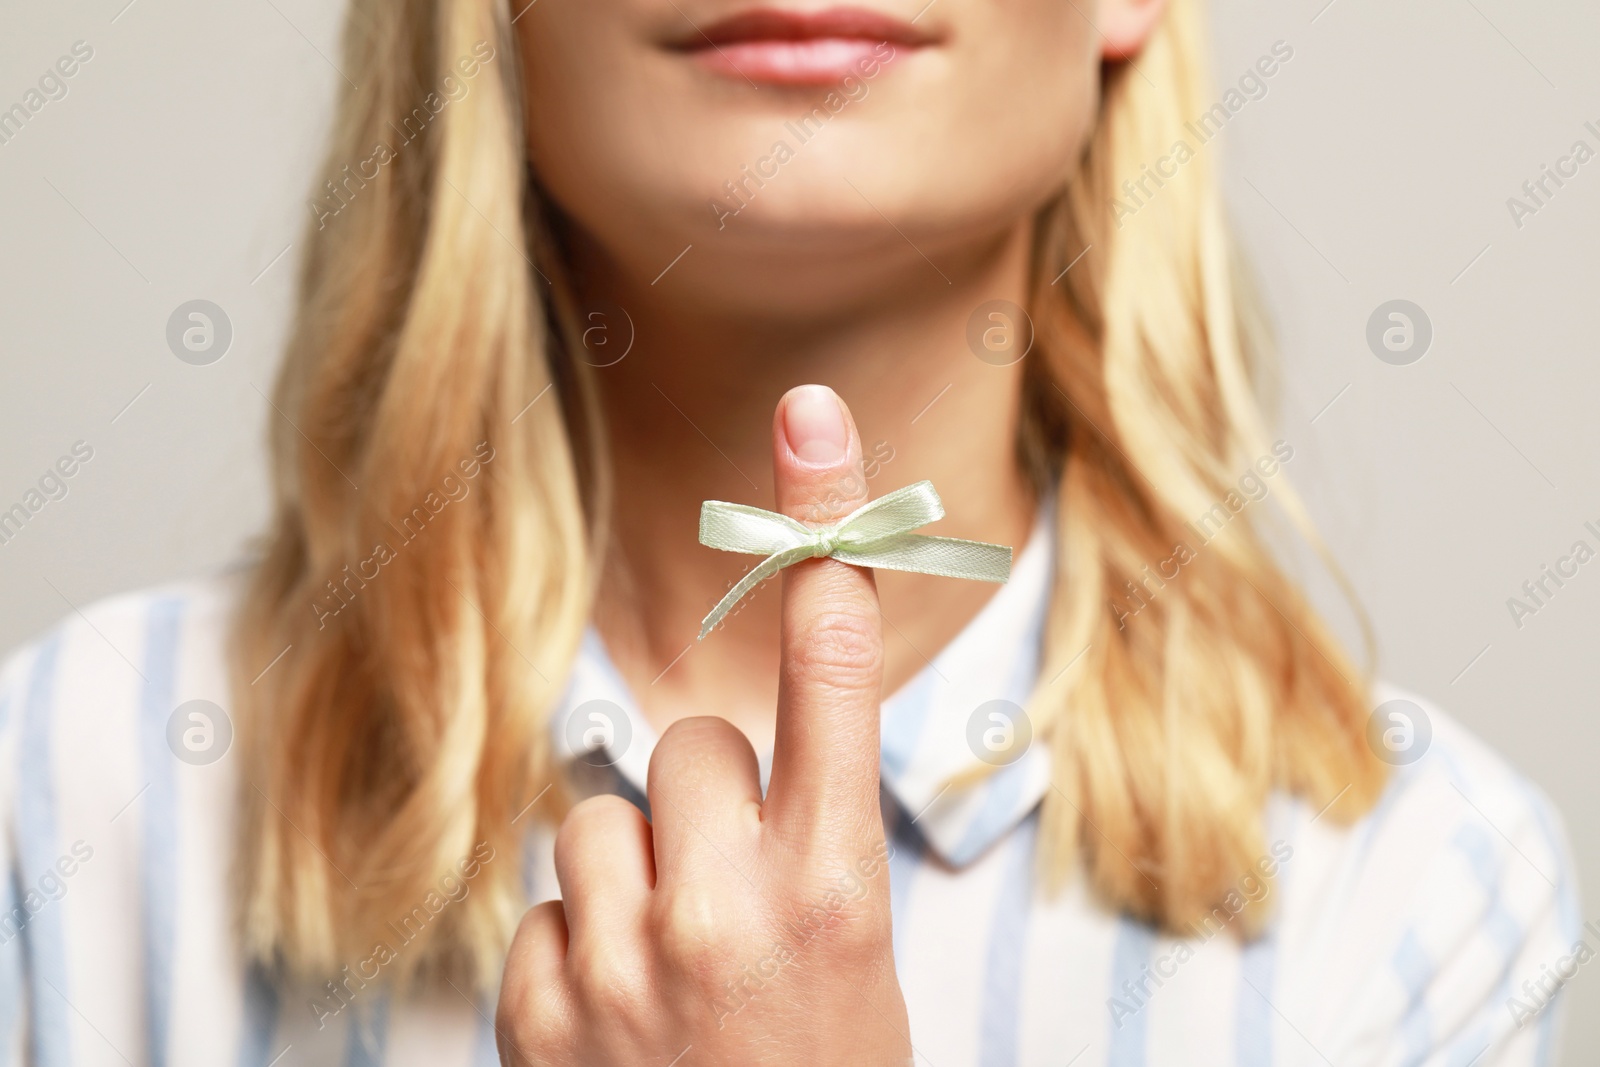 Photo of Woman showing index finger with tied bow as reminder against grey background, focus on hand